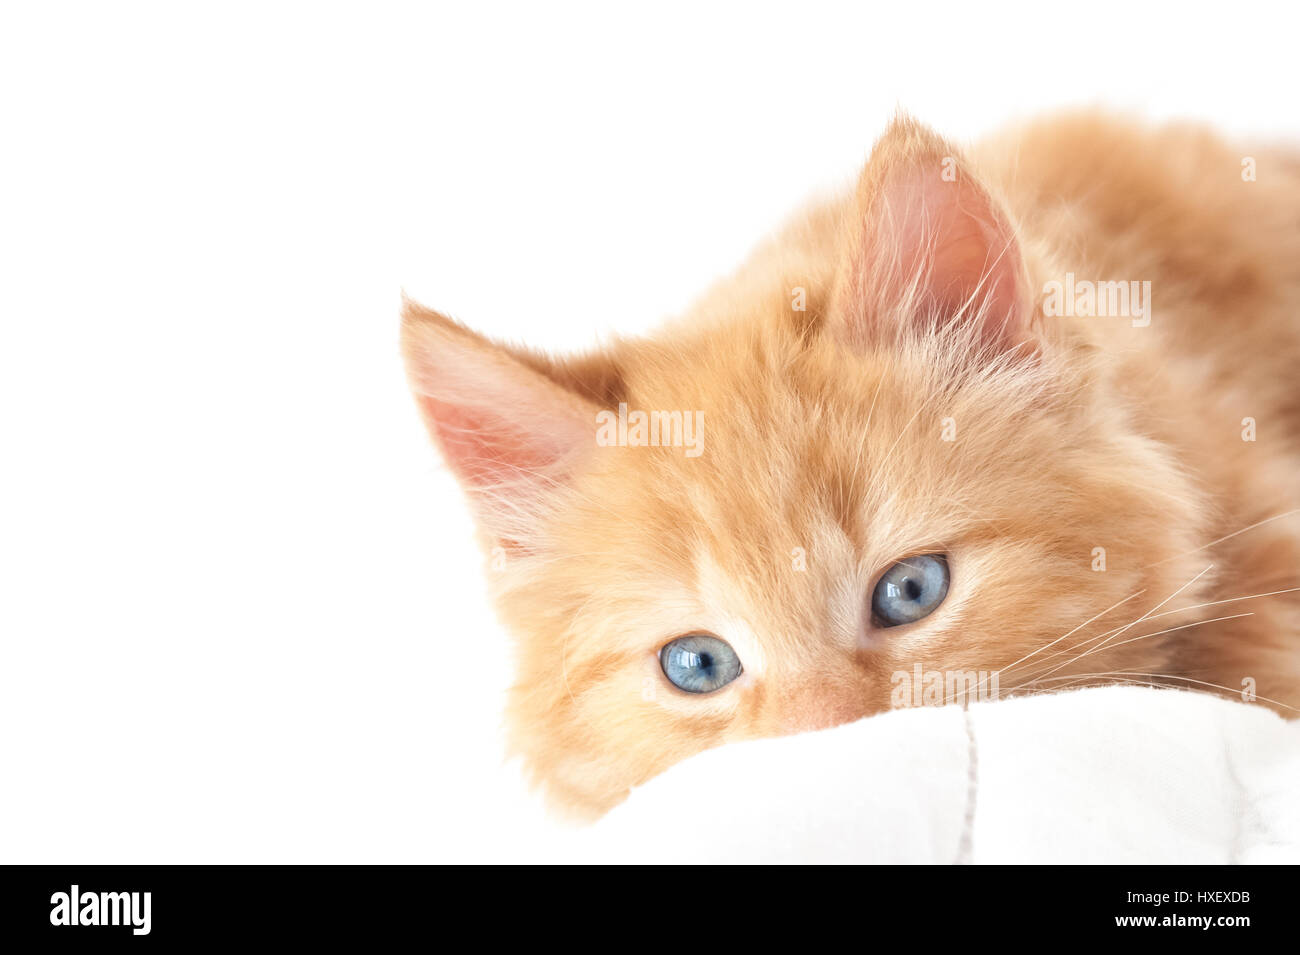 blue-eyed kitten closeup with white text space Stock Photo